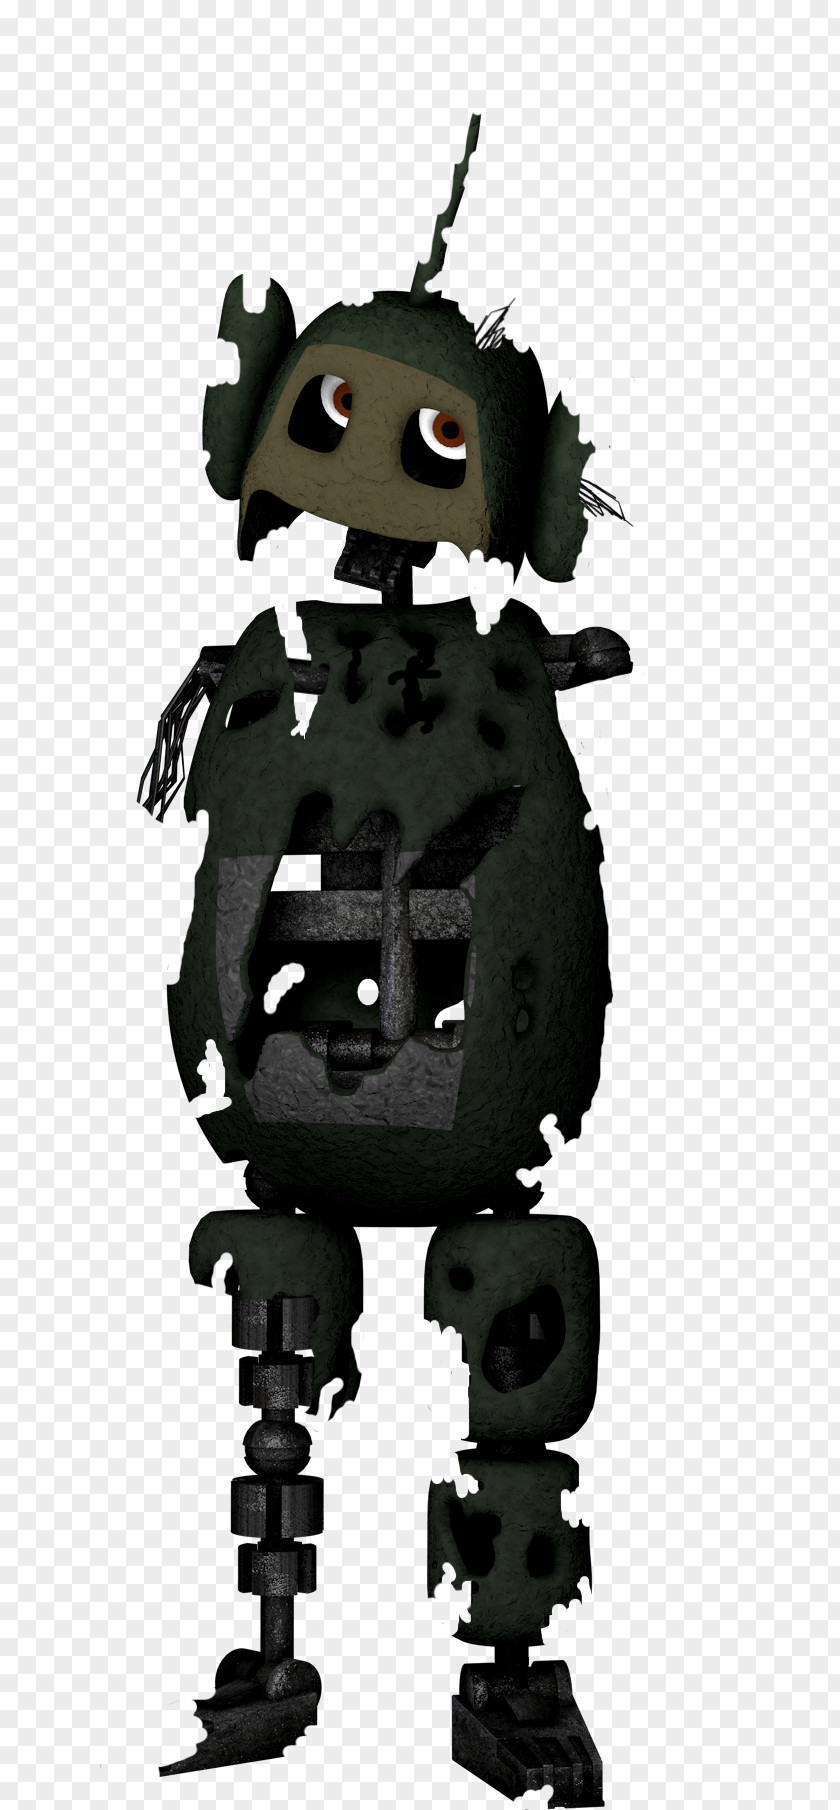 Withered Leaf Five Nights At Freddy's 2 Freddy's: Sister Location 3 4 Tinky-Winky PNG